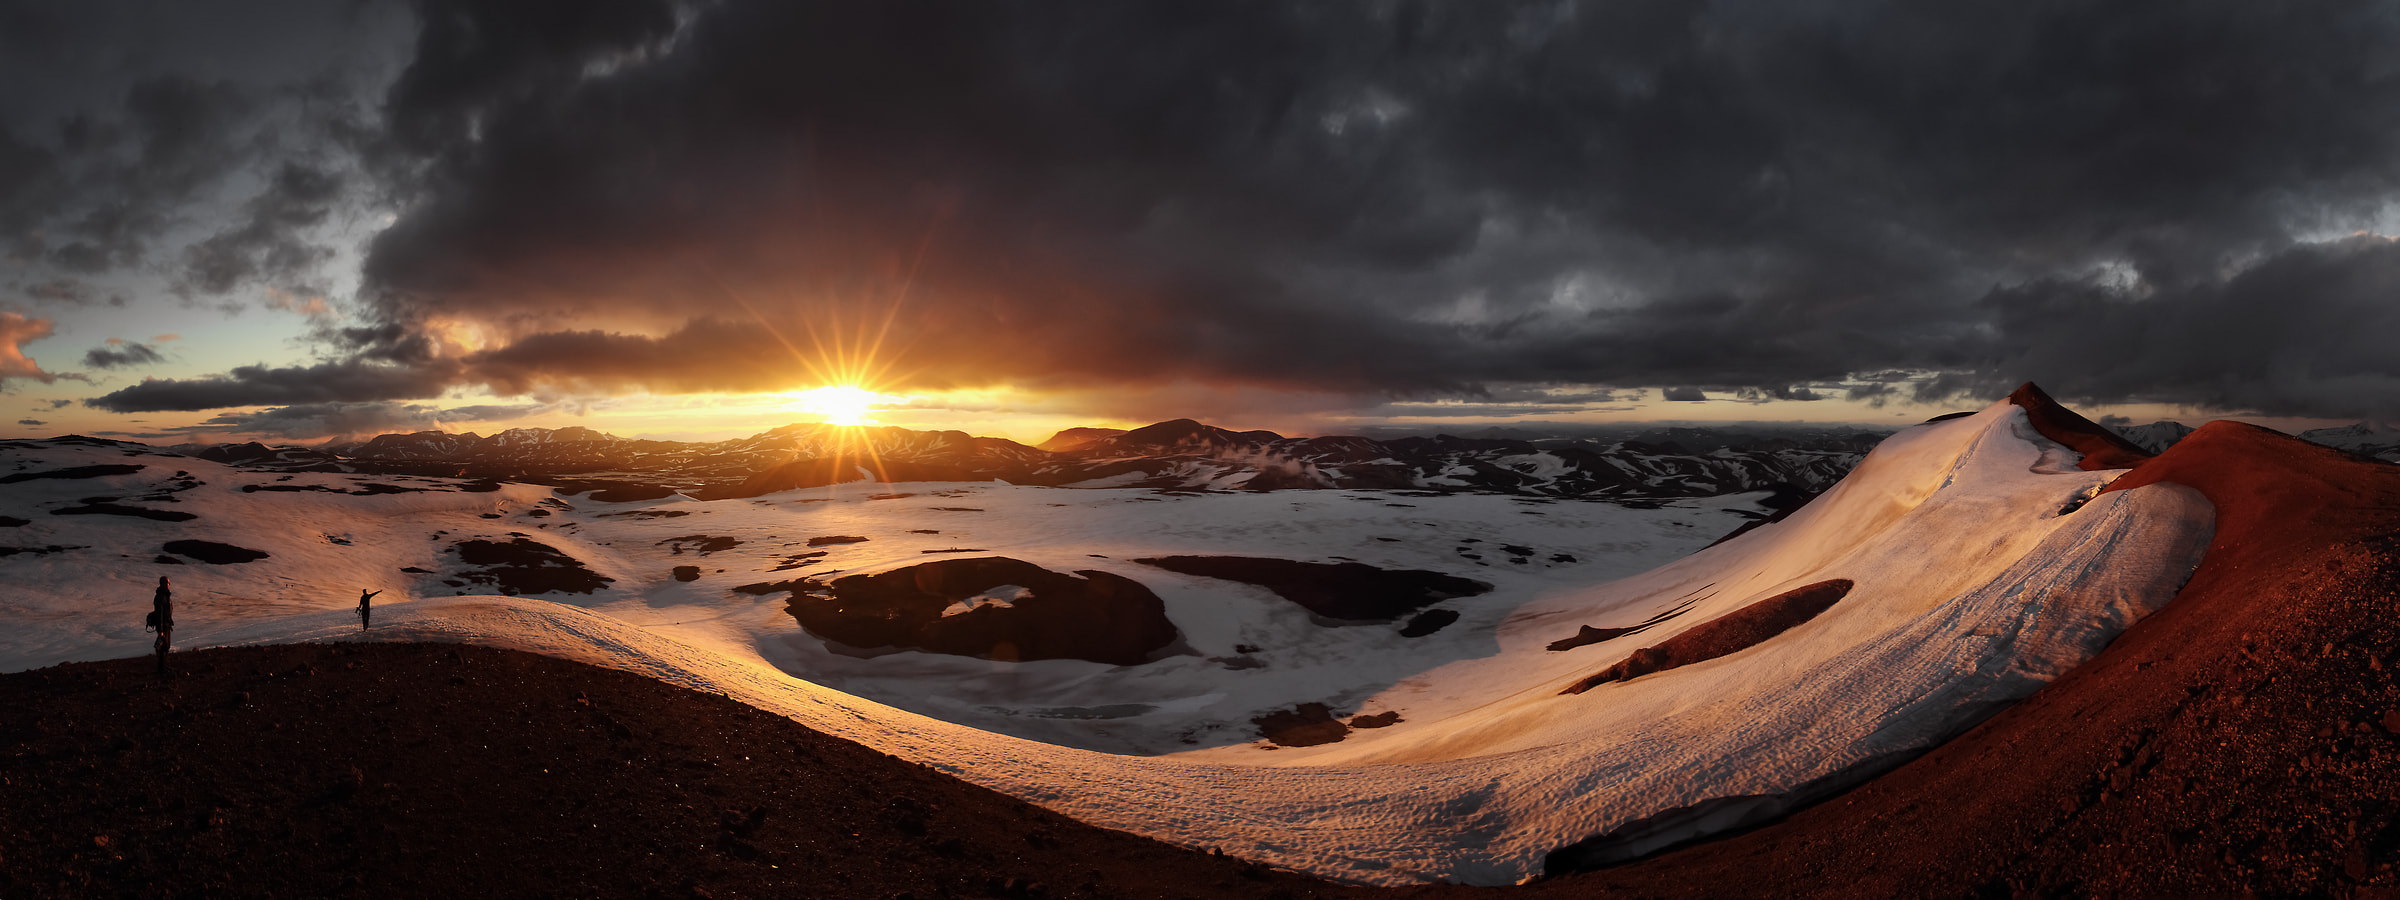 96 megapixels! A very high resolution, large-format VAST photo of sunset and a mountain landscape; panorama photograph created by Alexandre Deschaumes in Hrafntinnusker, Iceland.